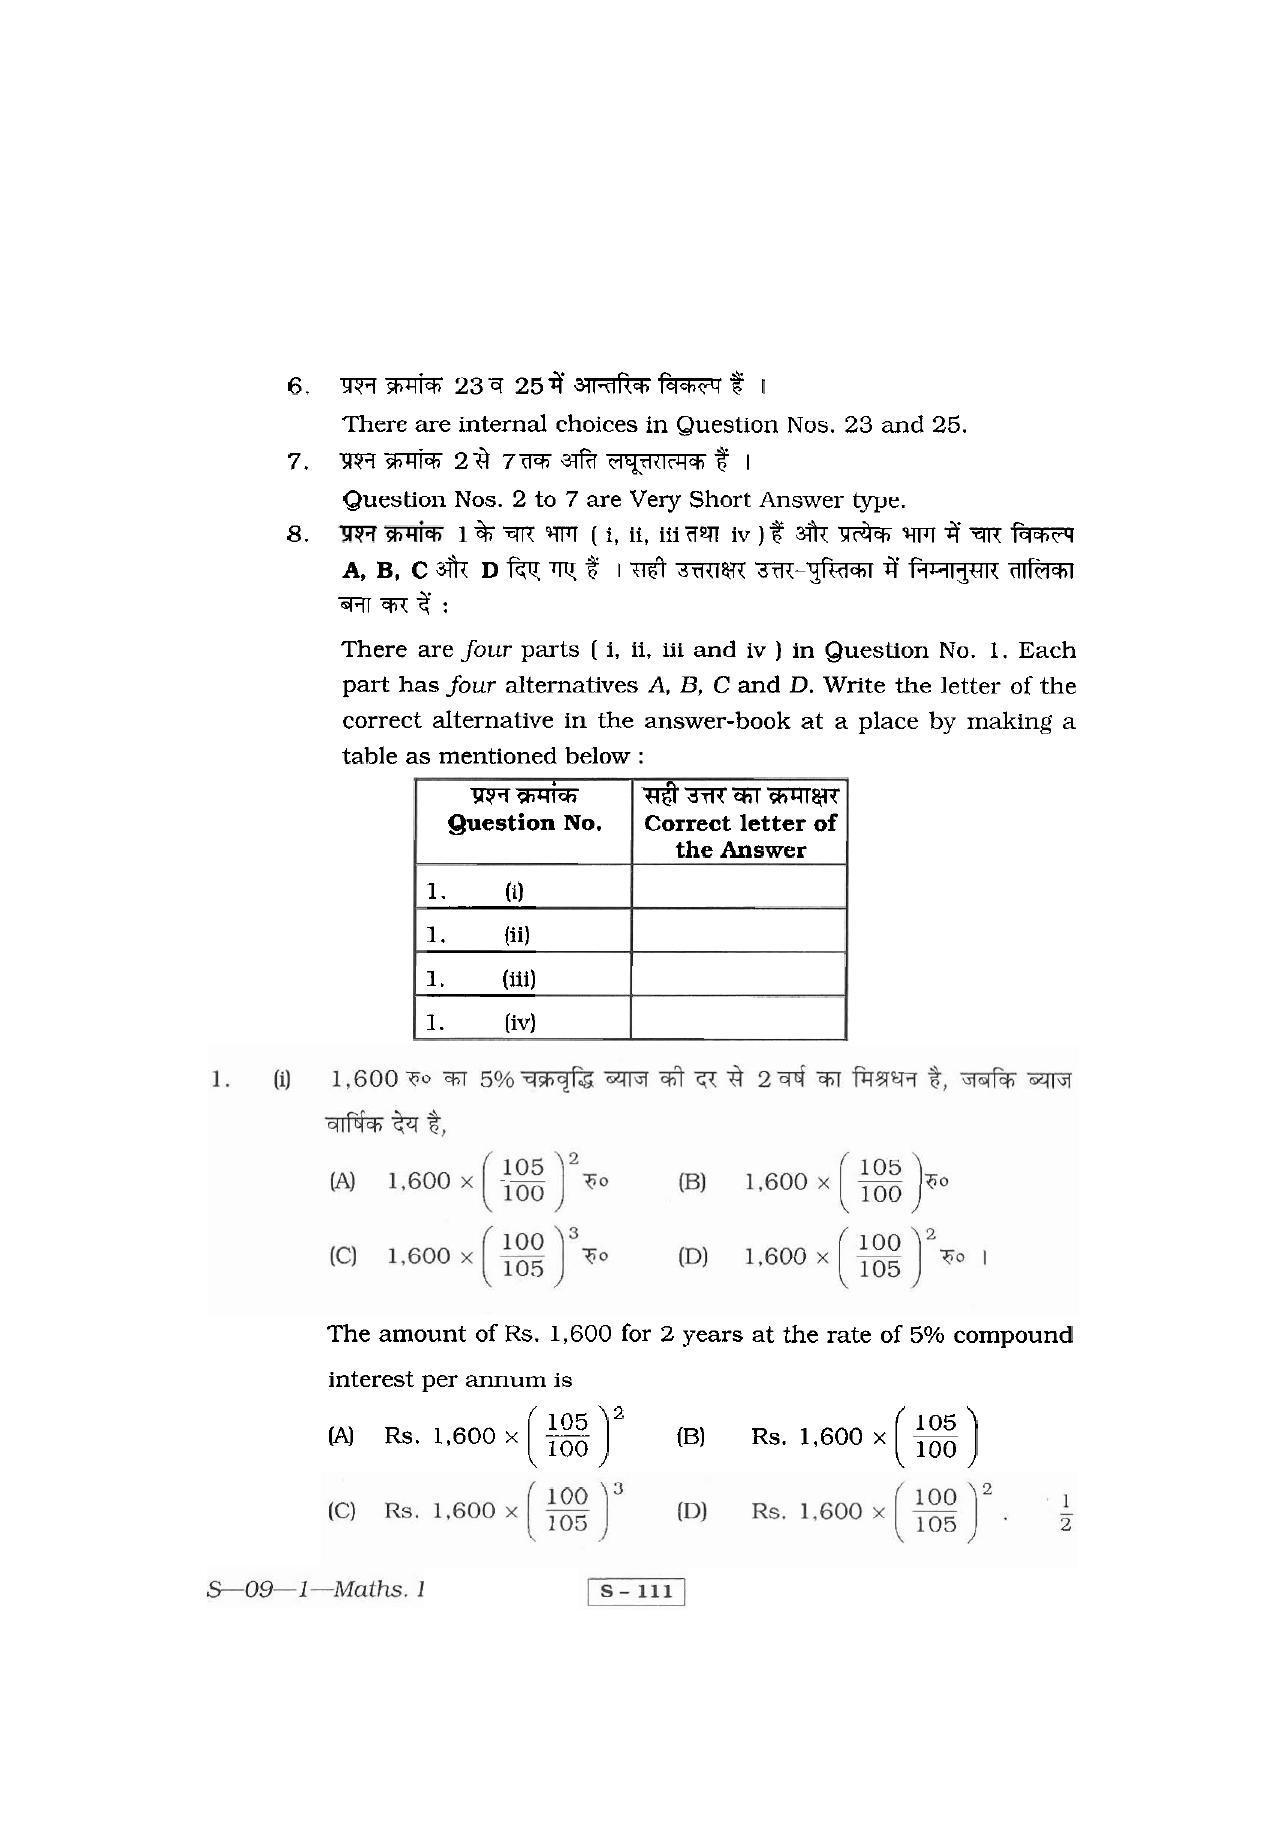 RBSE Class 10 Mathematics  – I 2011 Question Paper - Page 2